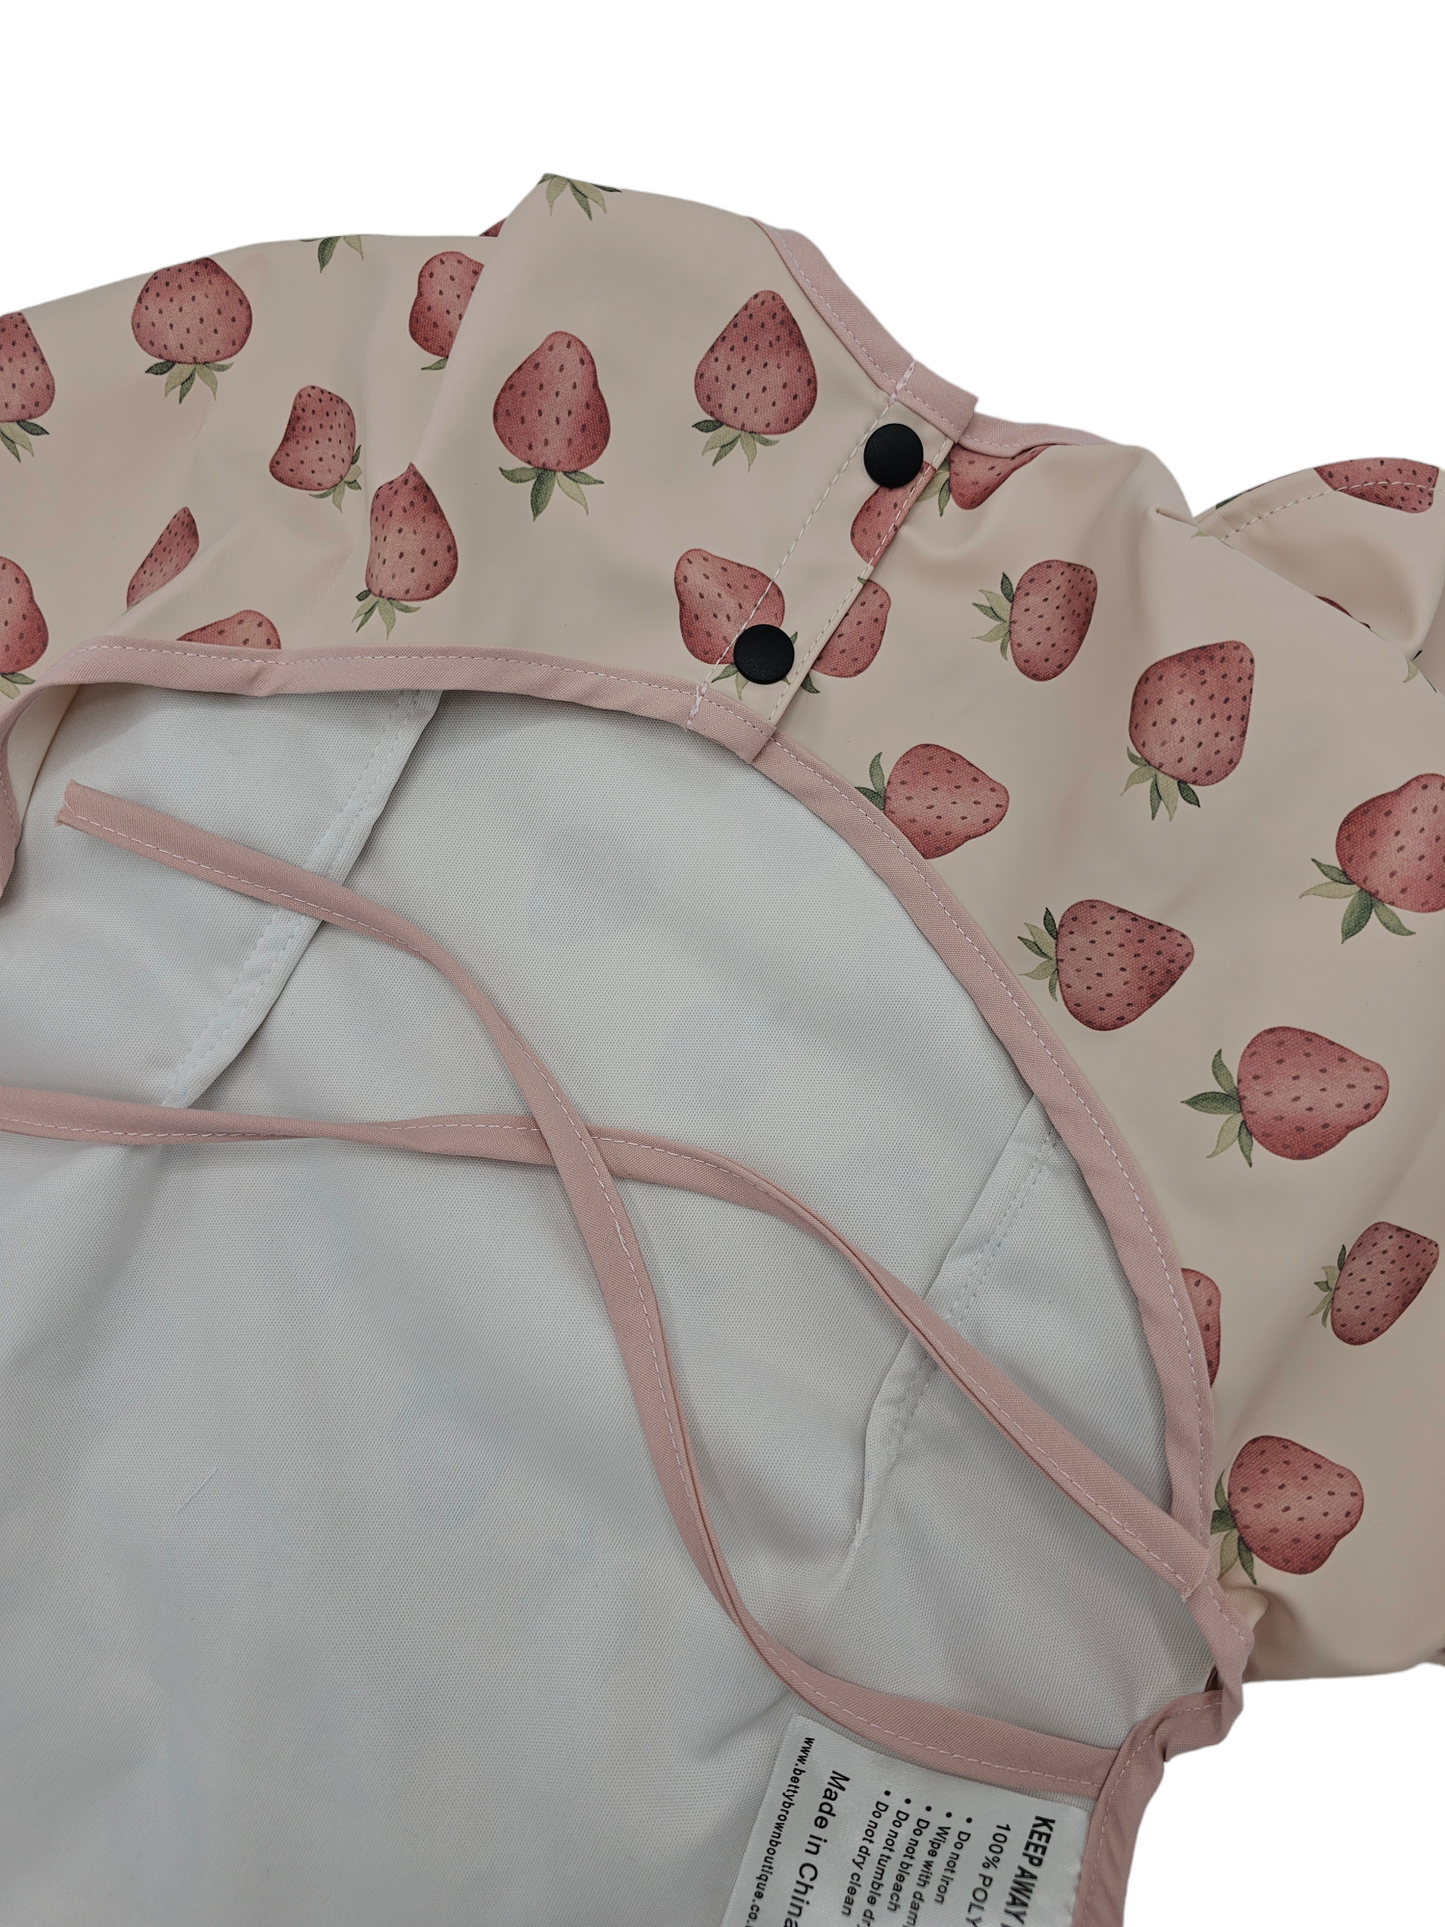 Dusty Pink Strawberry Frill Detail Waterproof Bib with Sleeves - Betty Brown Boutique Ltd